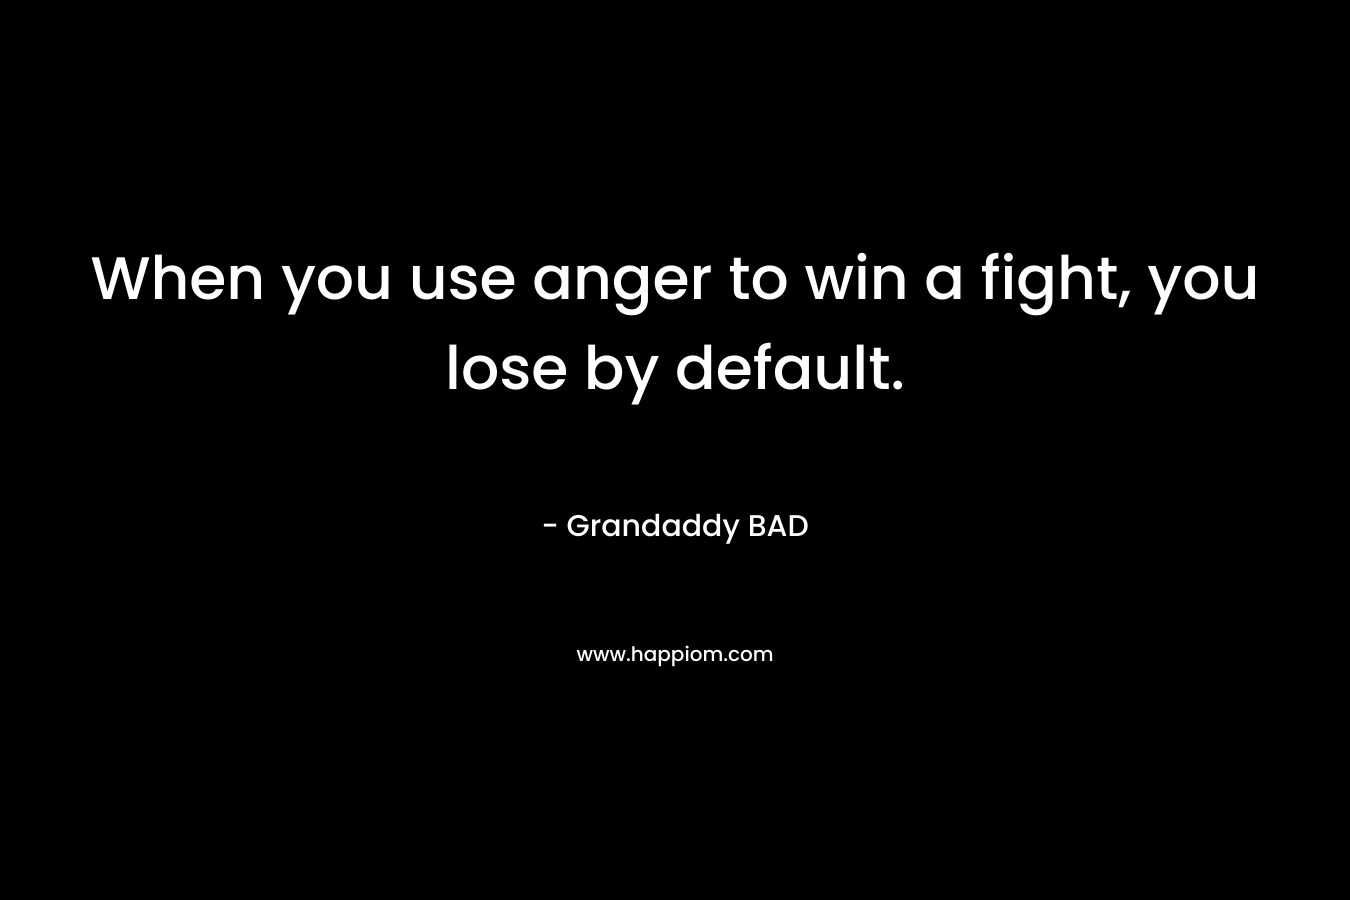 When you use anger to win a fight, you lose by default.